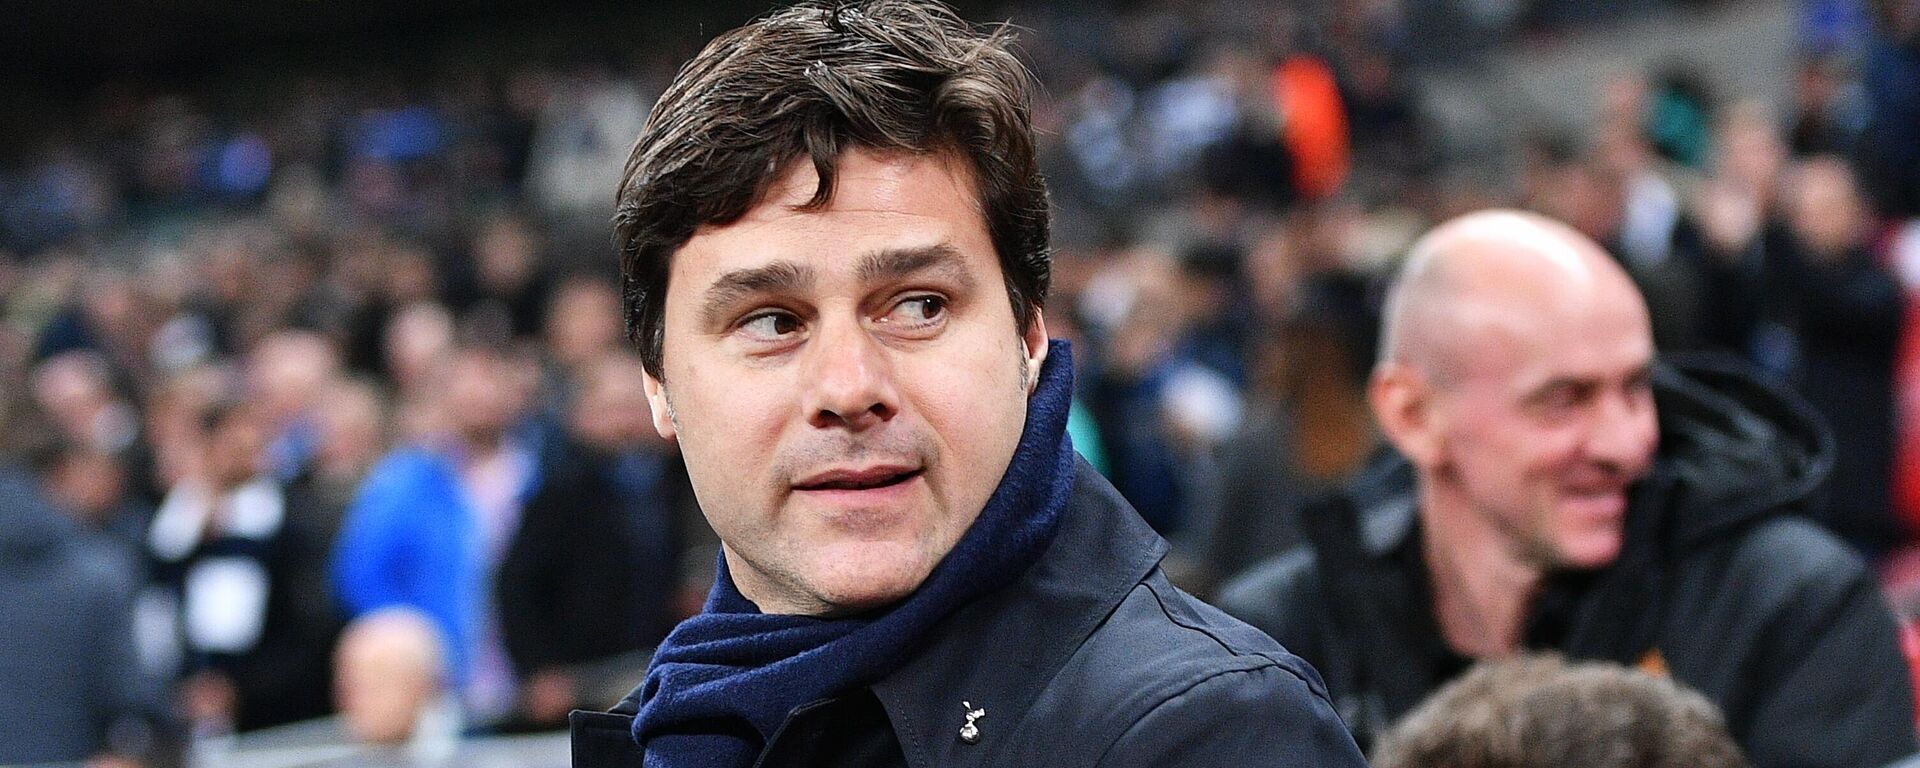 Mauricio Pochettino during the UEFA Champions League group stage match between England's Tottenham Hotspur London and Russia's CSKA Moscow. - Sputnik International, 1920, 29.04.2022